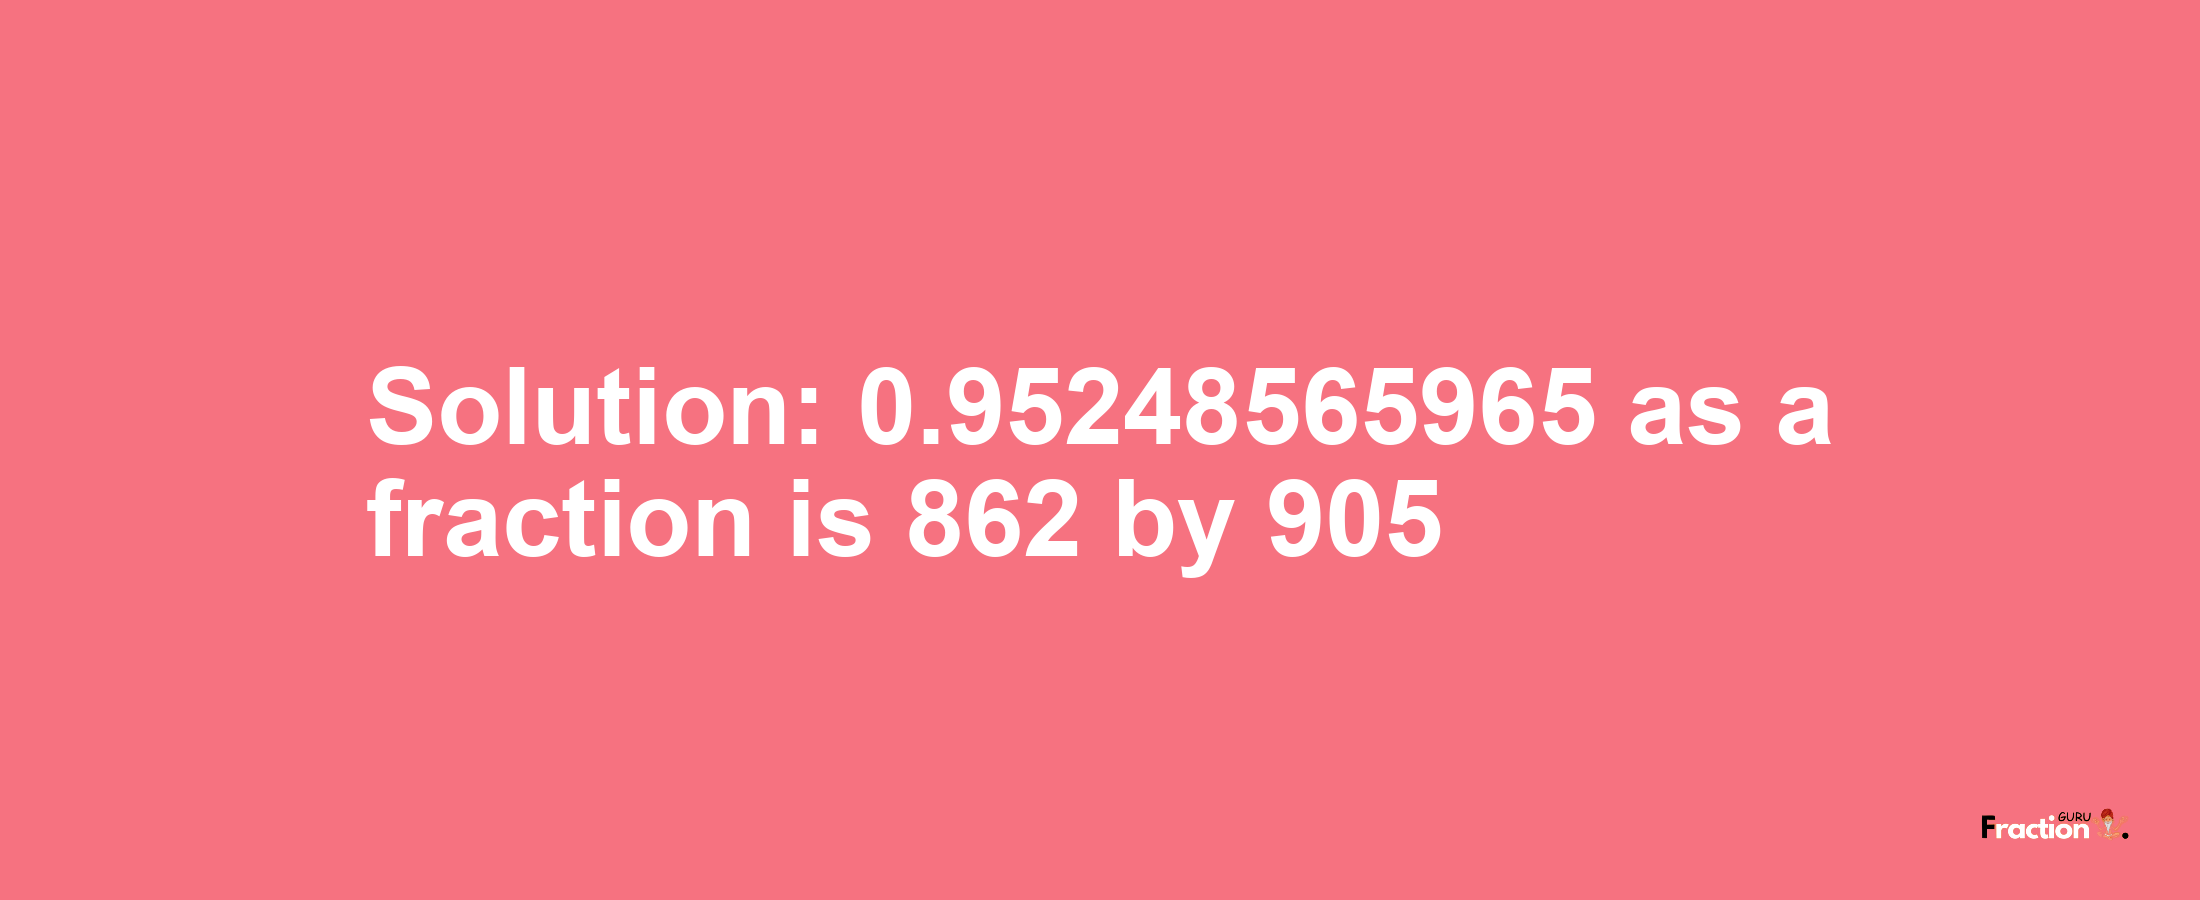 Solution:0.95248565965 as a fraction is 862/905